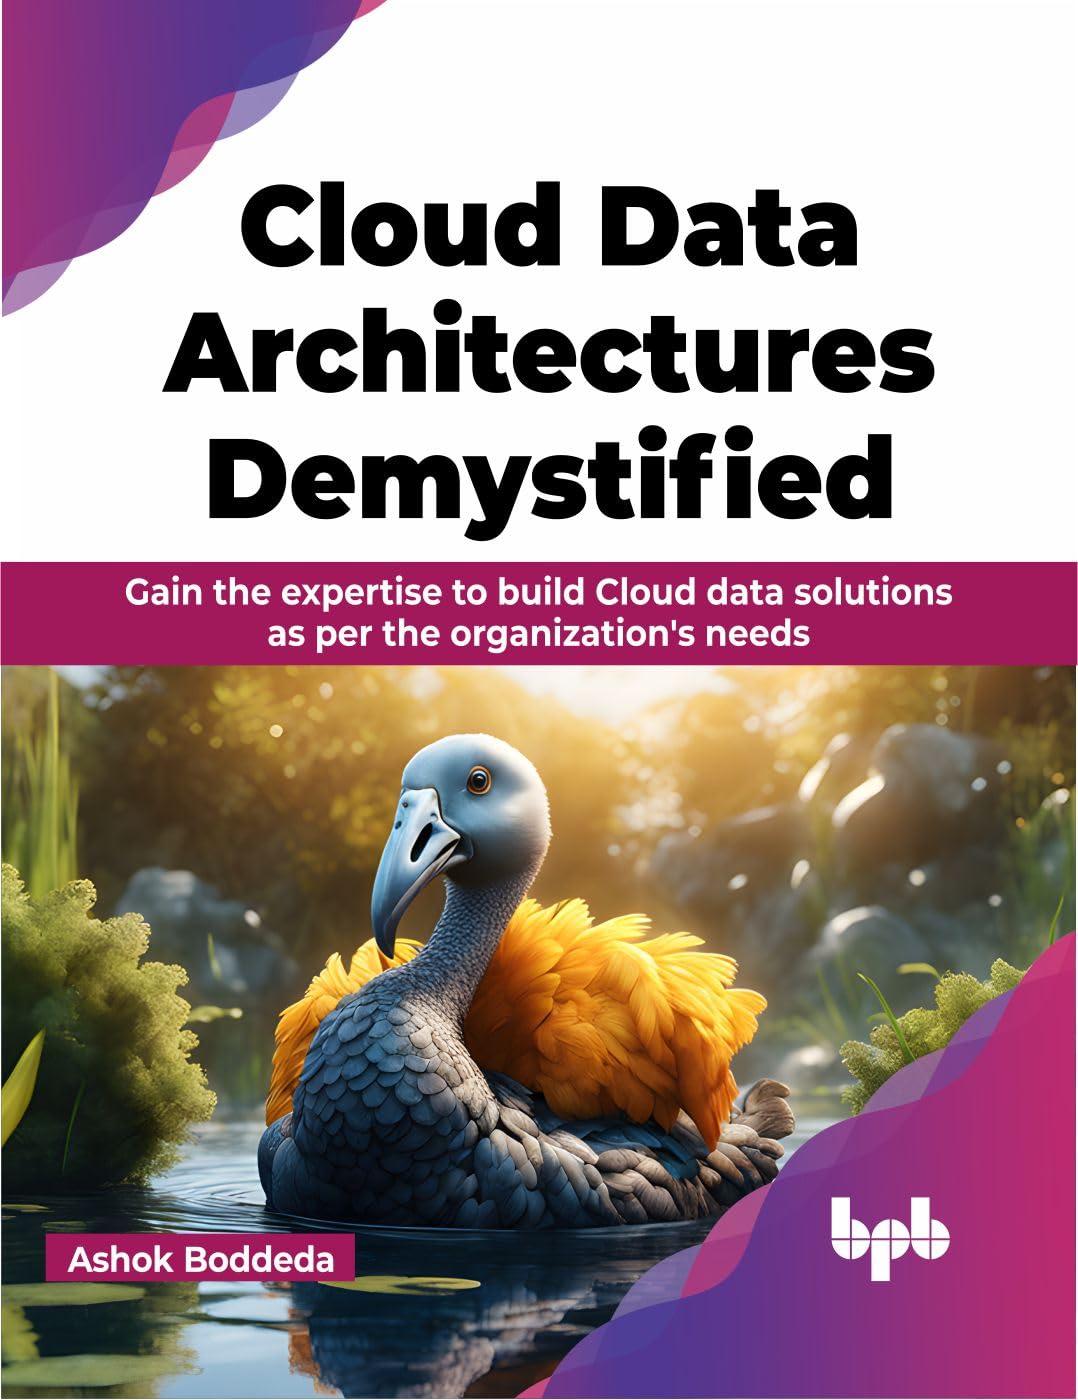 cloud data architectures demystified gain the expertise to build cloud data solutions as per the